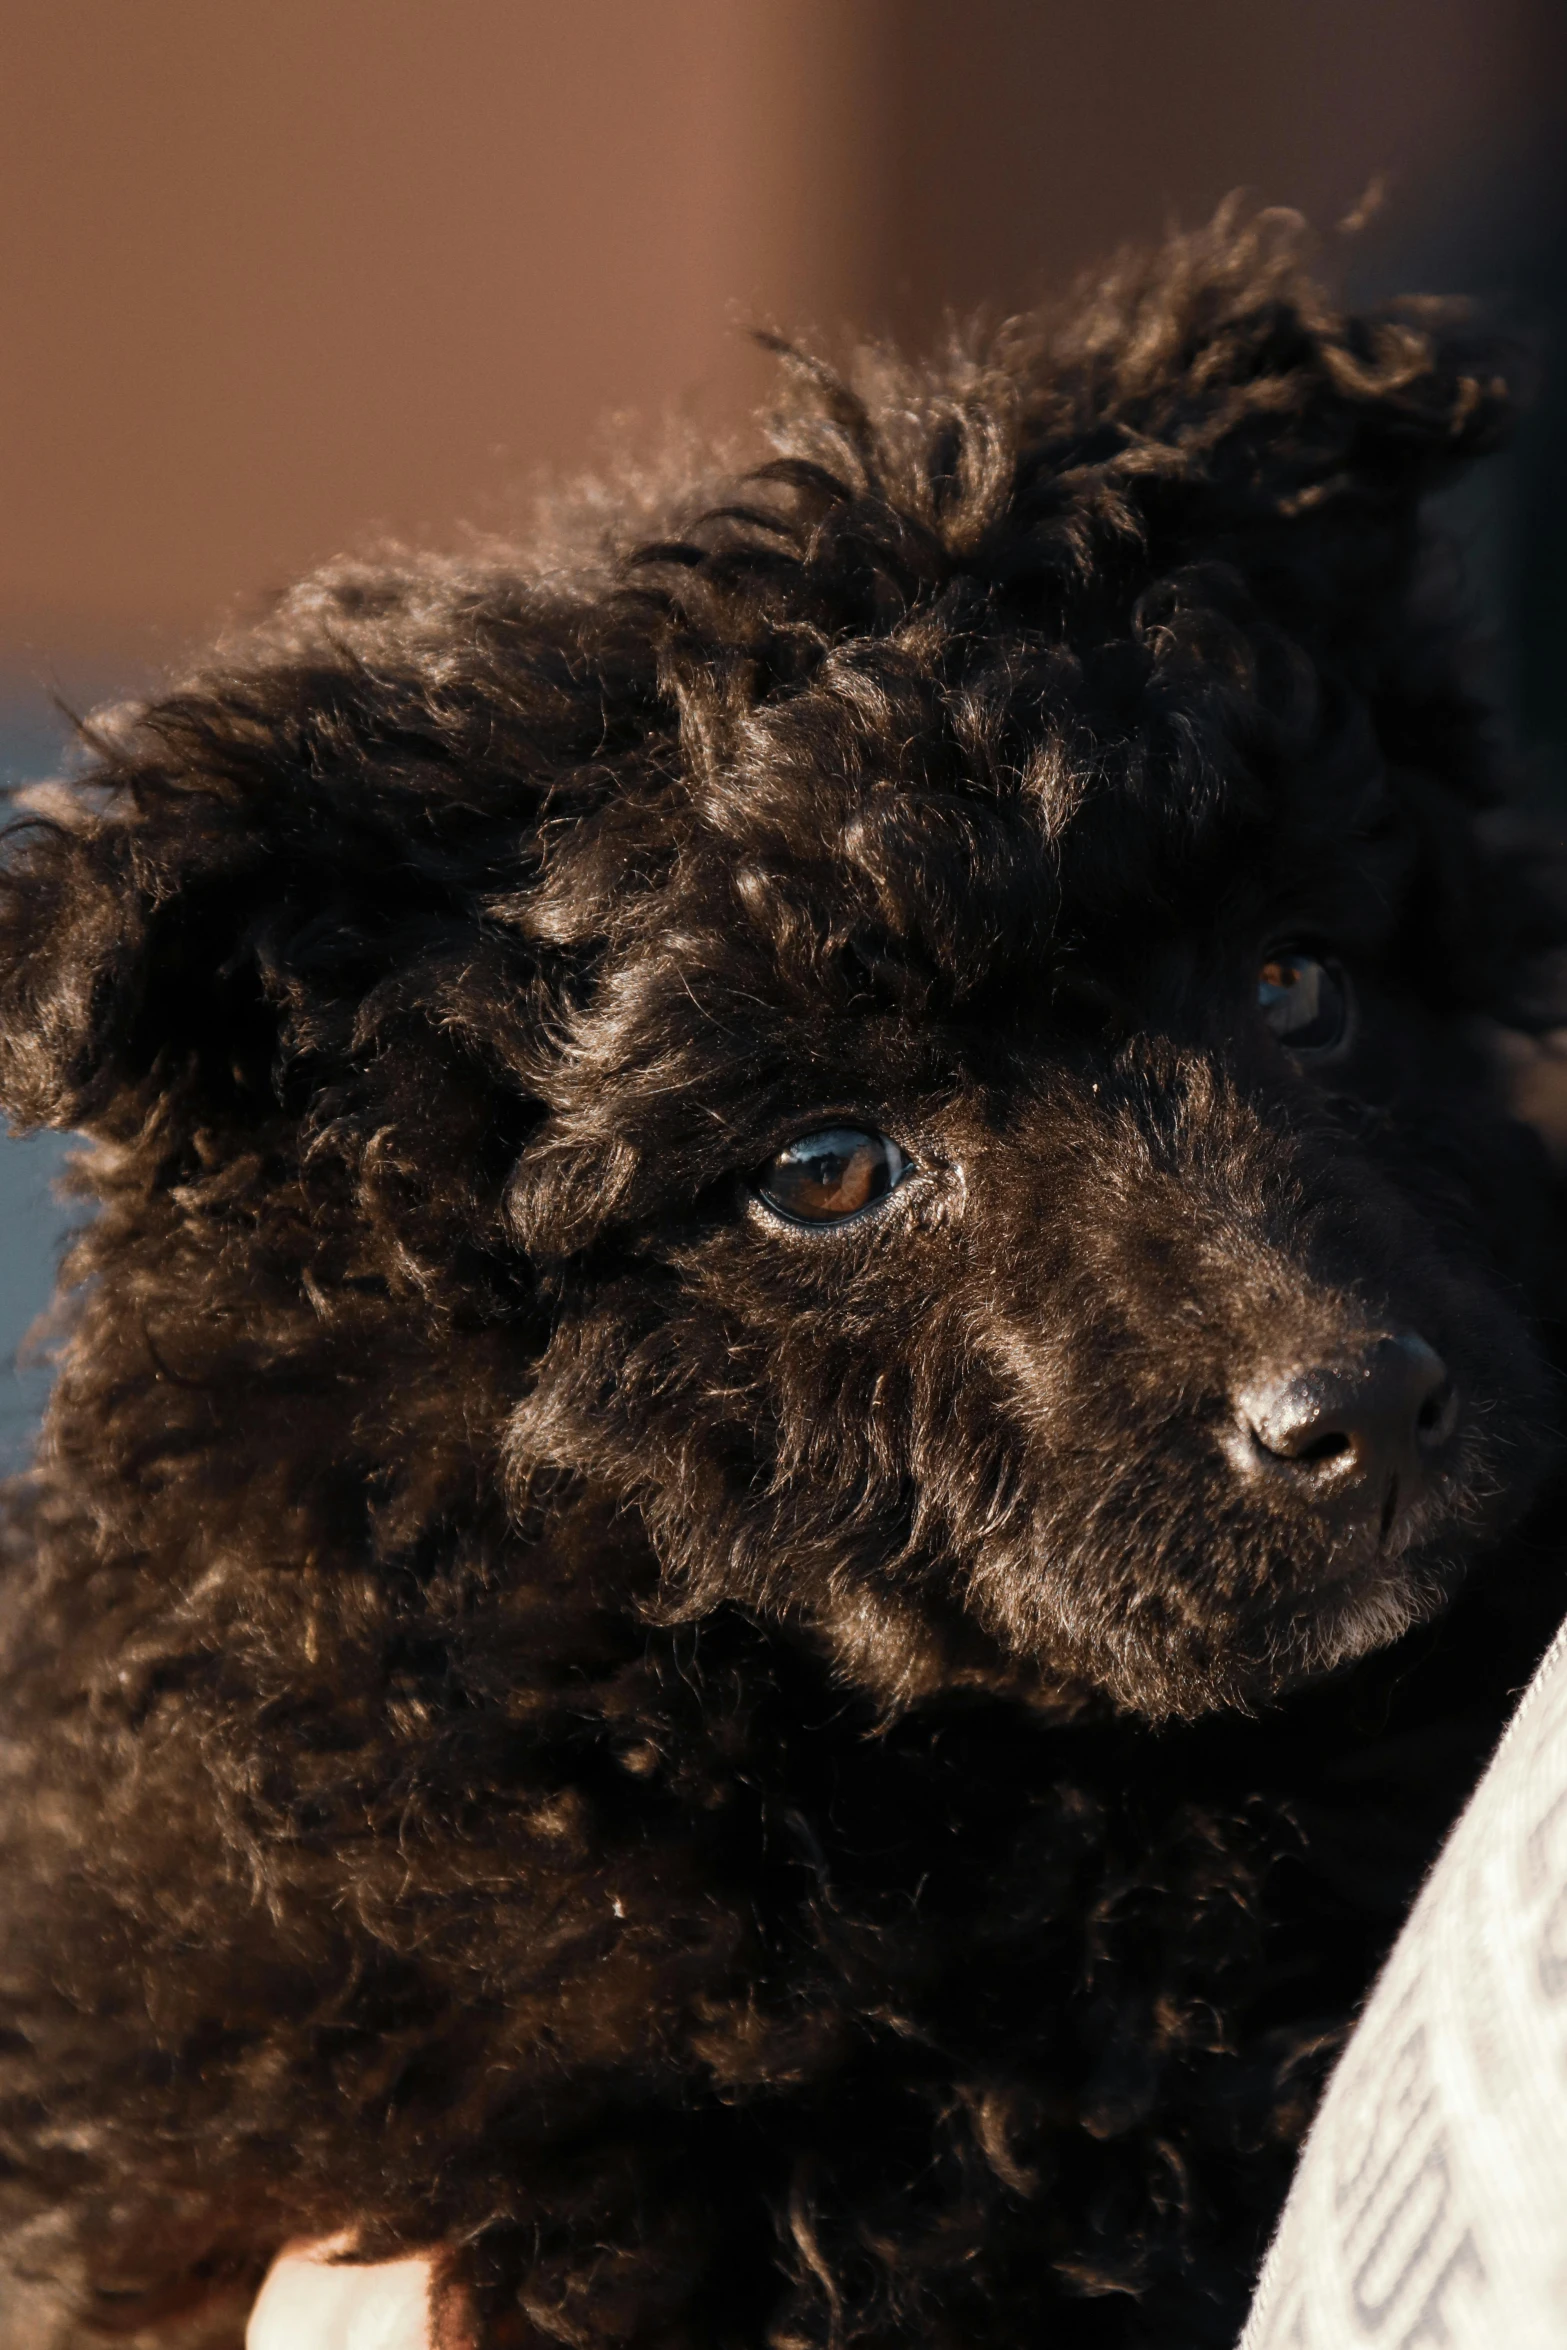 a close up of a poodle being held by someone